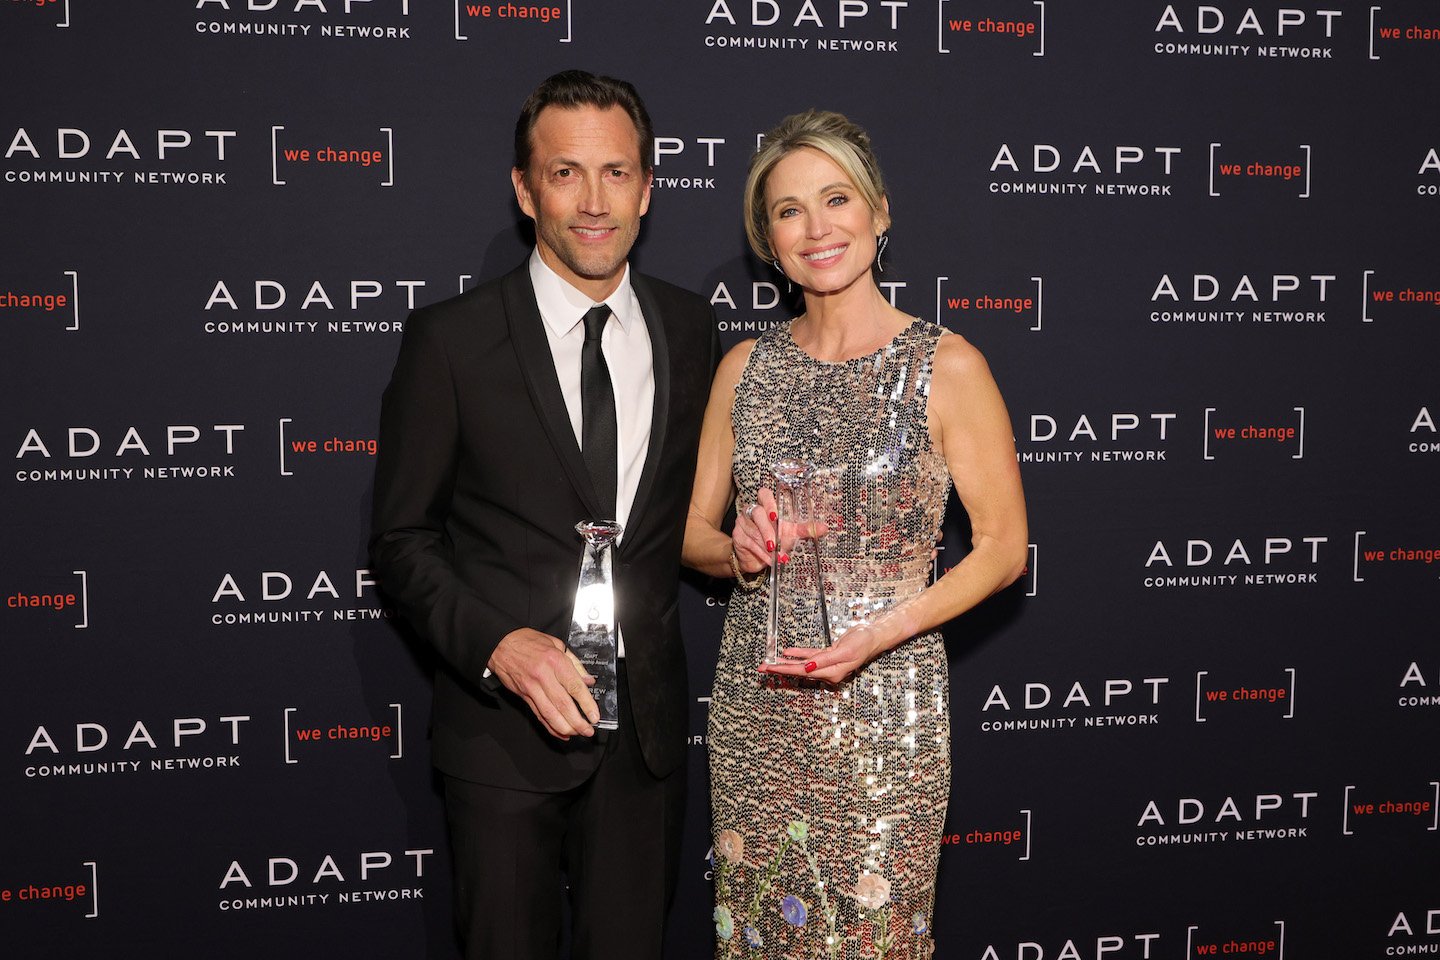 Andrew Shue and Amy Robach from 'Good Morning America' standing next to each other holding awards